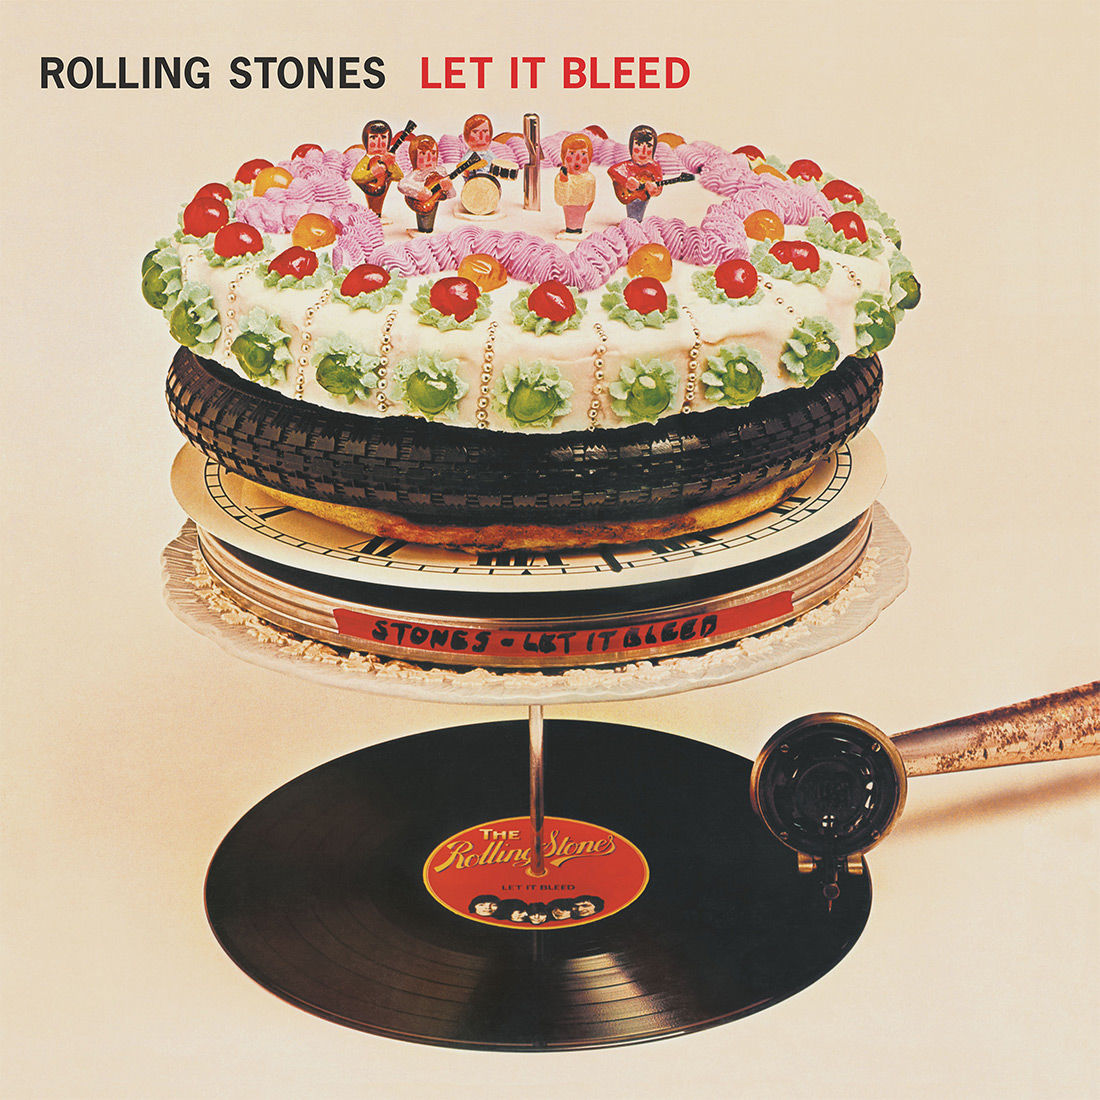 The Rolling Stones - Let It Bleed 50th Anniversary Edition